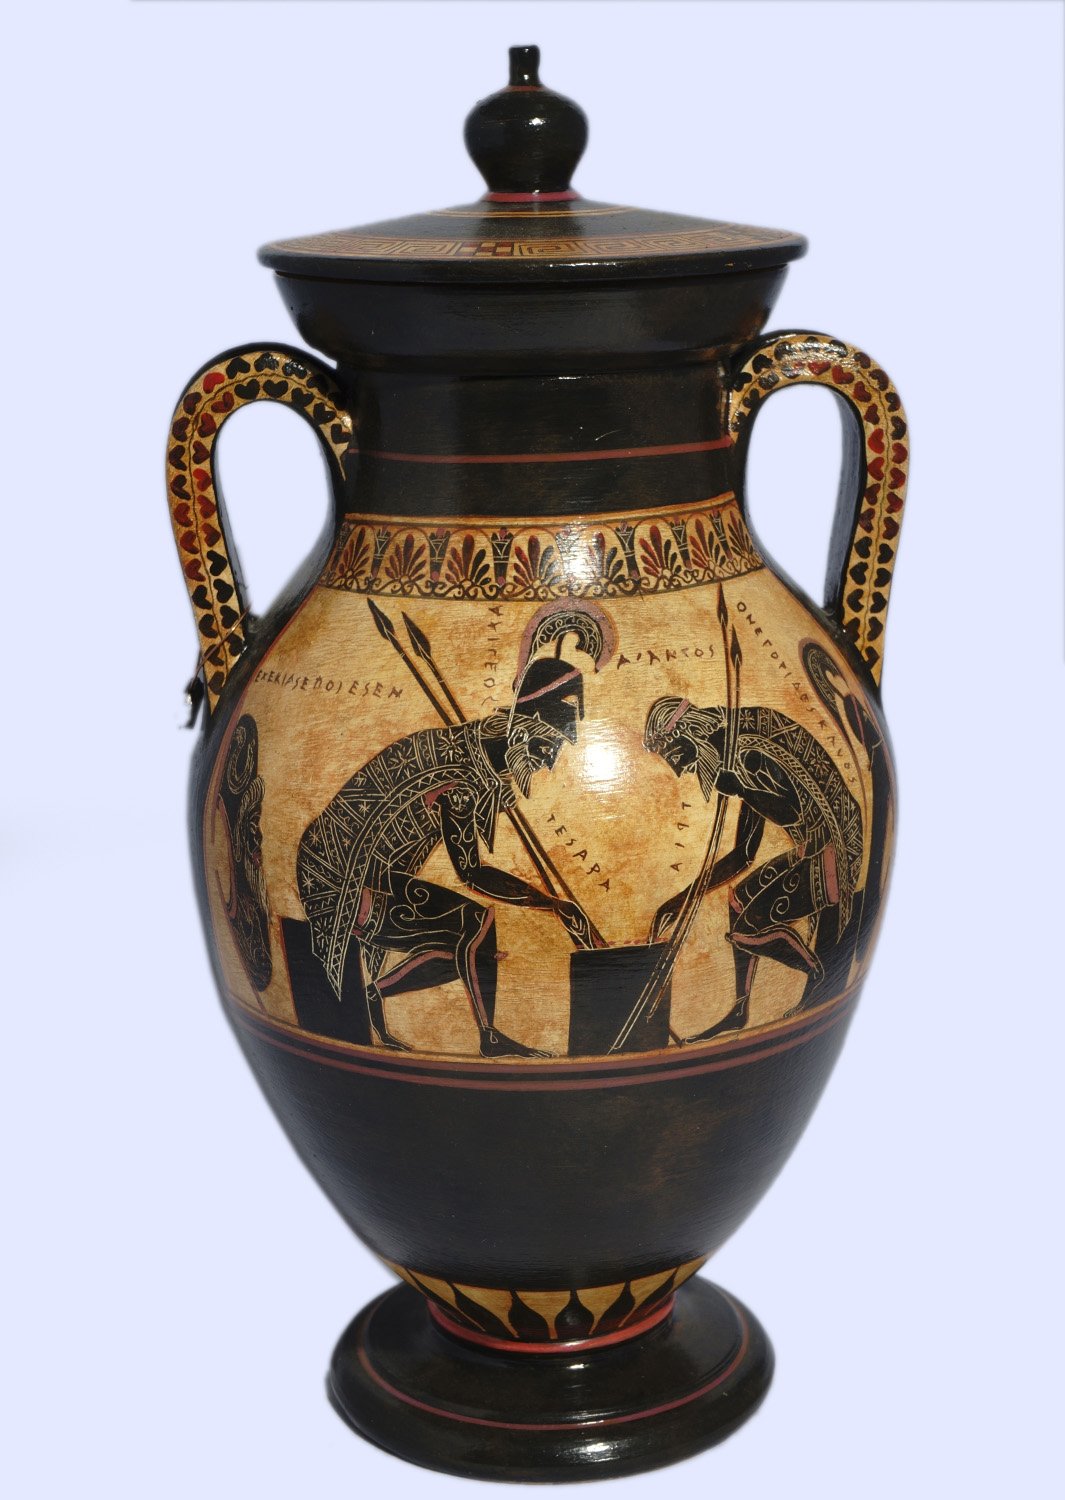 Archaic black-figure amphora with Achilles and Ajax playing a board game